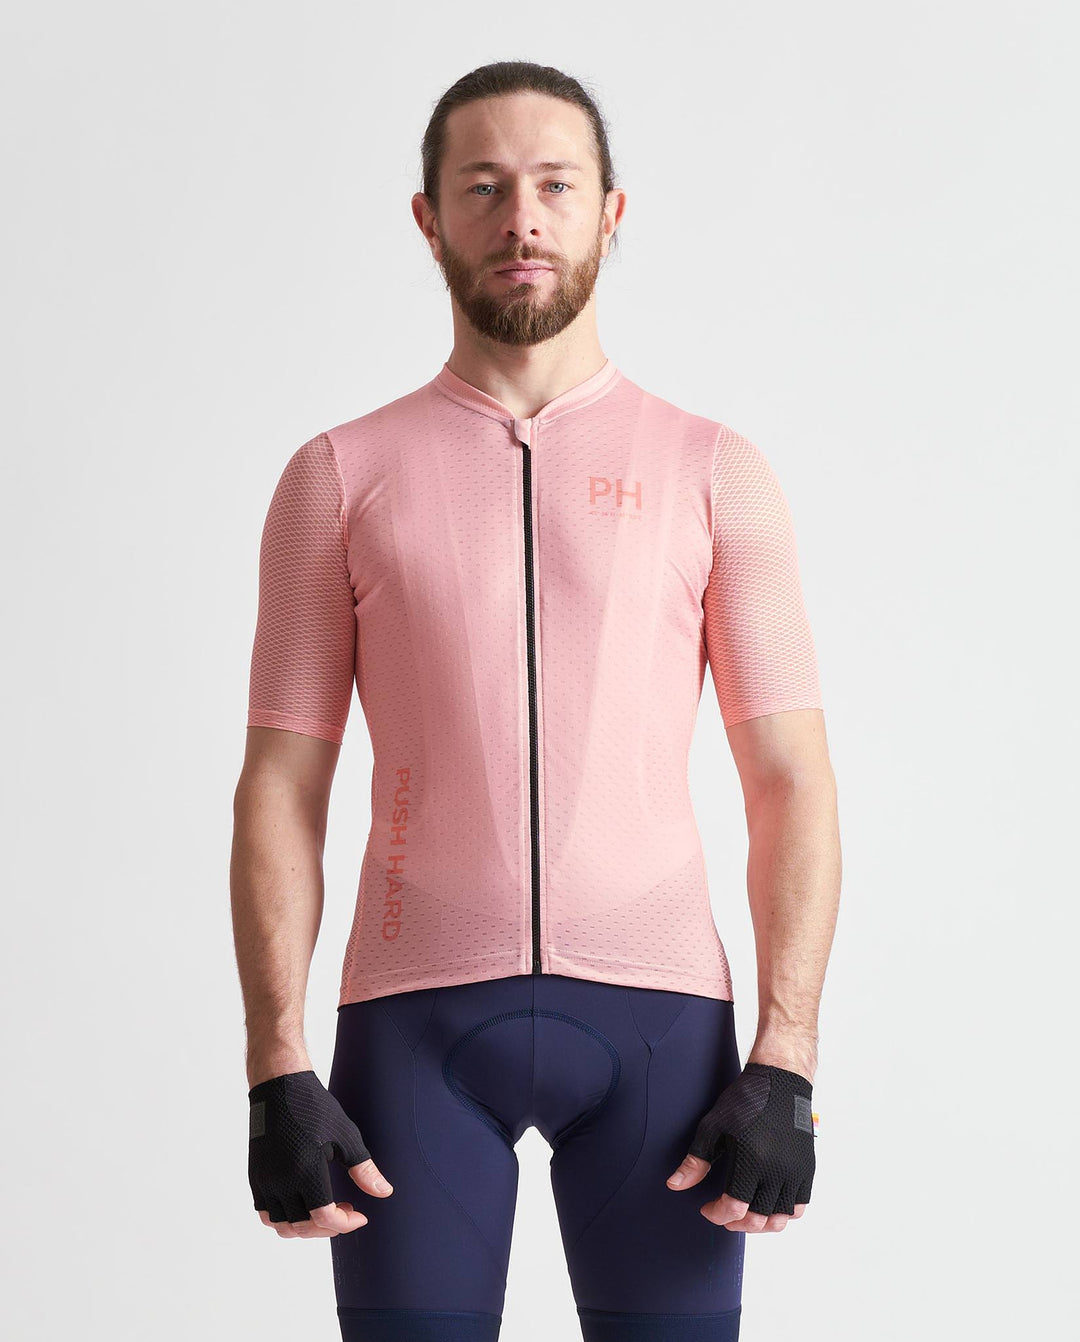 New Cosmo Short Sleeve Cycling Jersey for Men